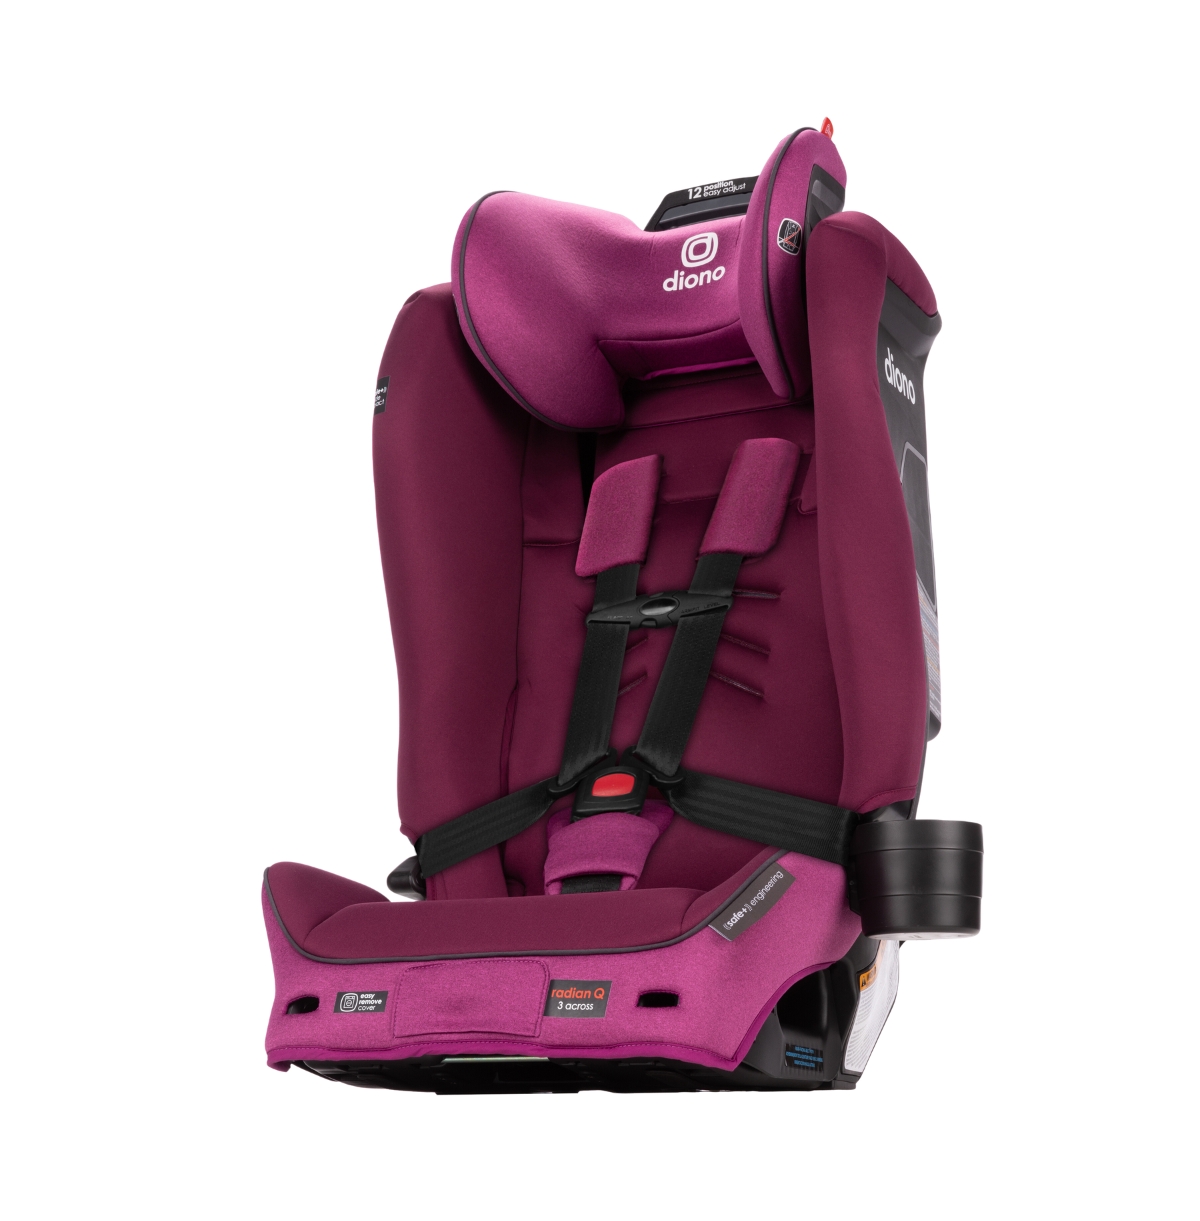 Diono Radian 3r Safeplus All-in-one Convertible Car Seat In Purple Plum